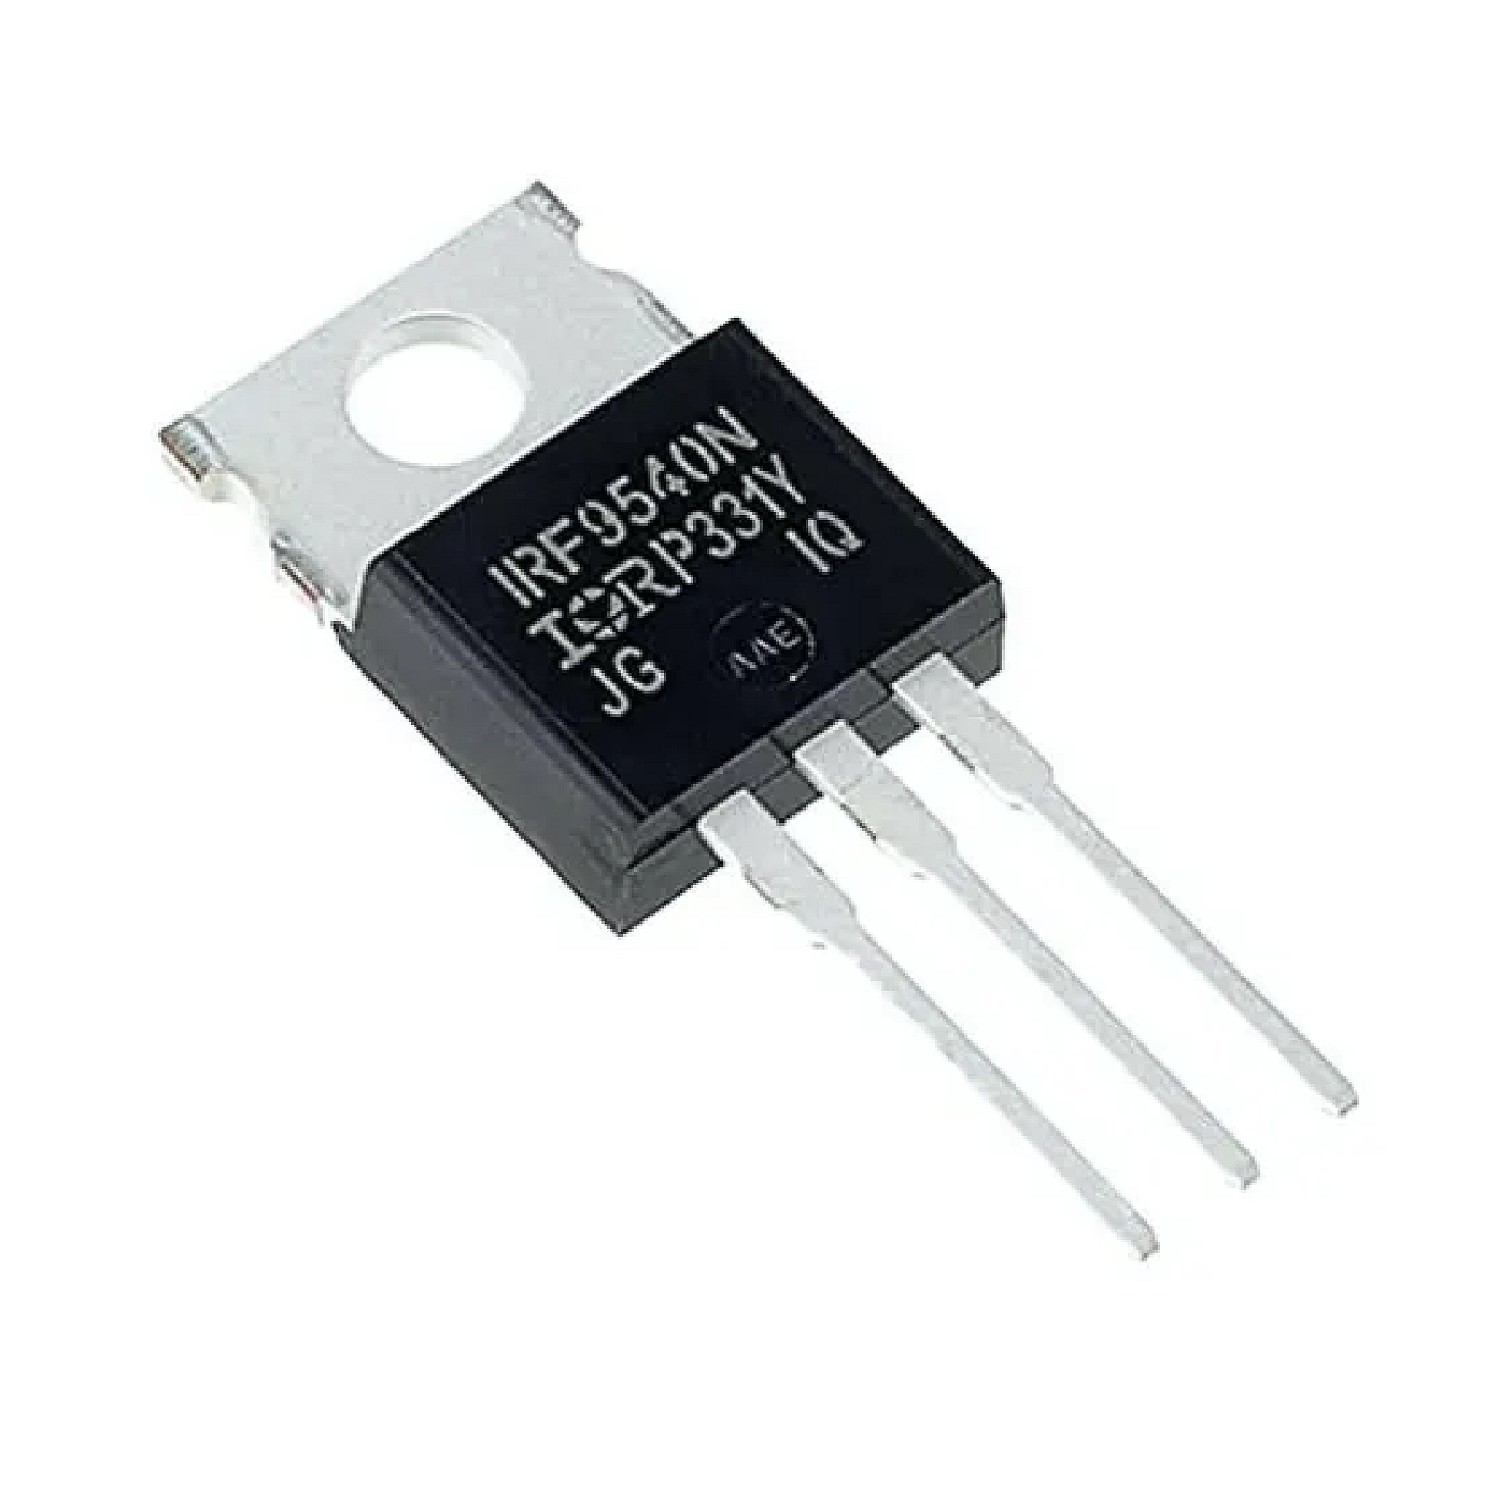 TRANSISTOR FET IRF 9540 19A, 100V, 0.200 Ohm, P-Channel Power MOSFET